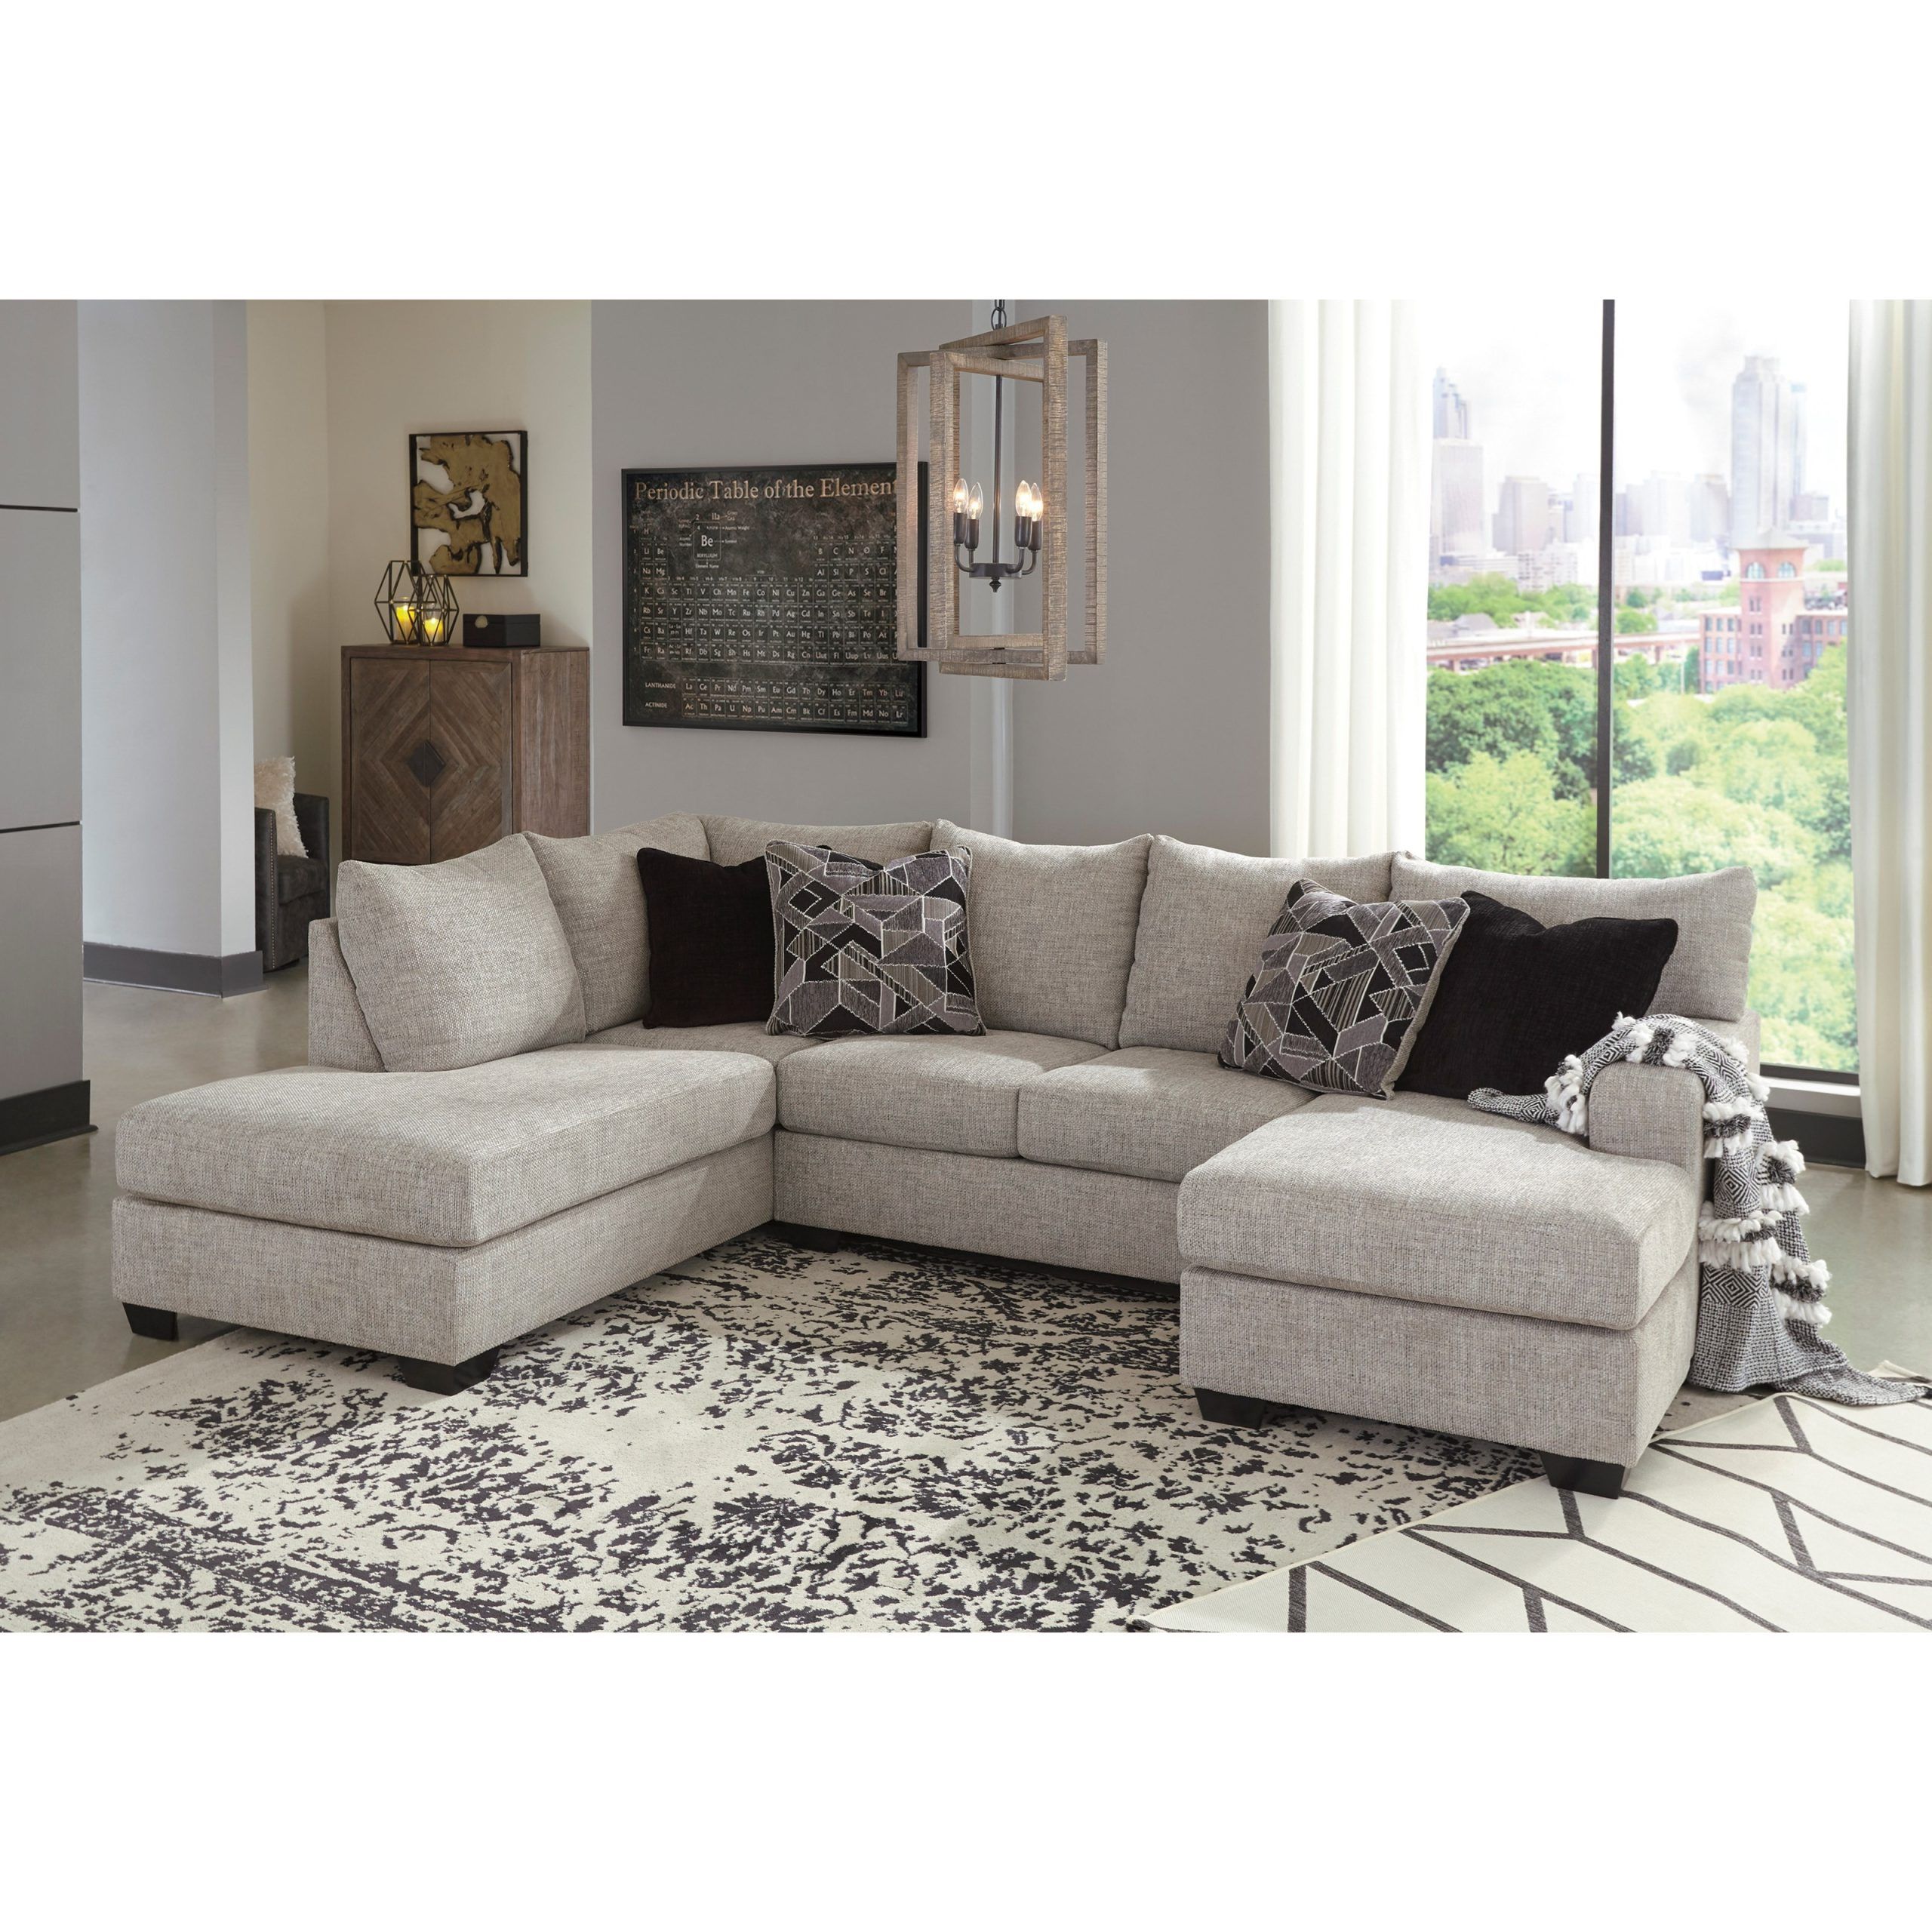 U Shaped Sectional With Two Chaises | Sadler's Home Furnishings For Modern U Shaped Sectional Couch Sets (Gallery 15 of 20)